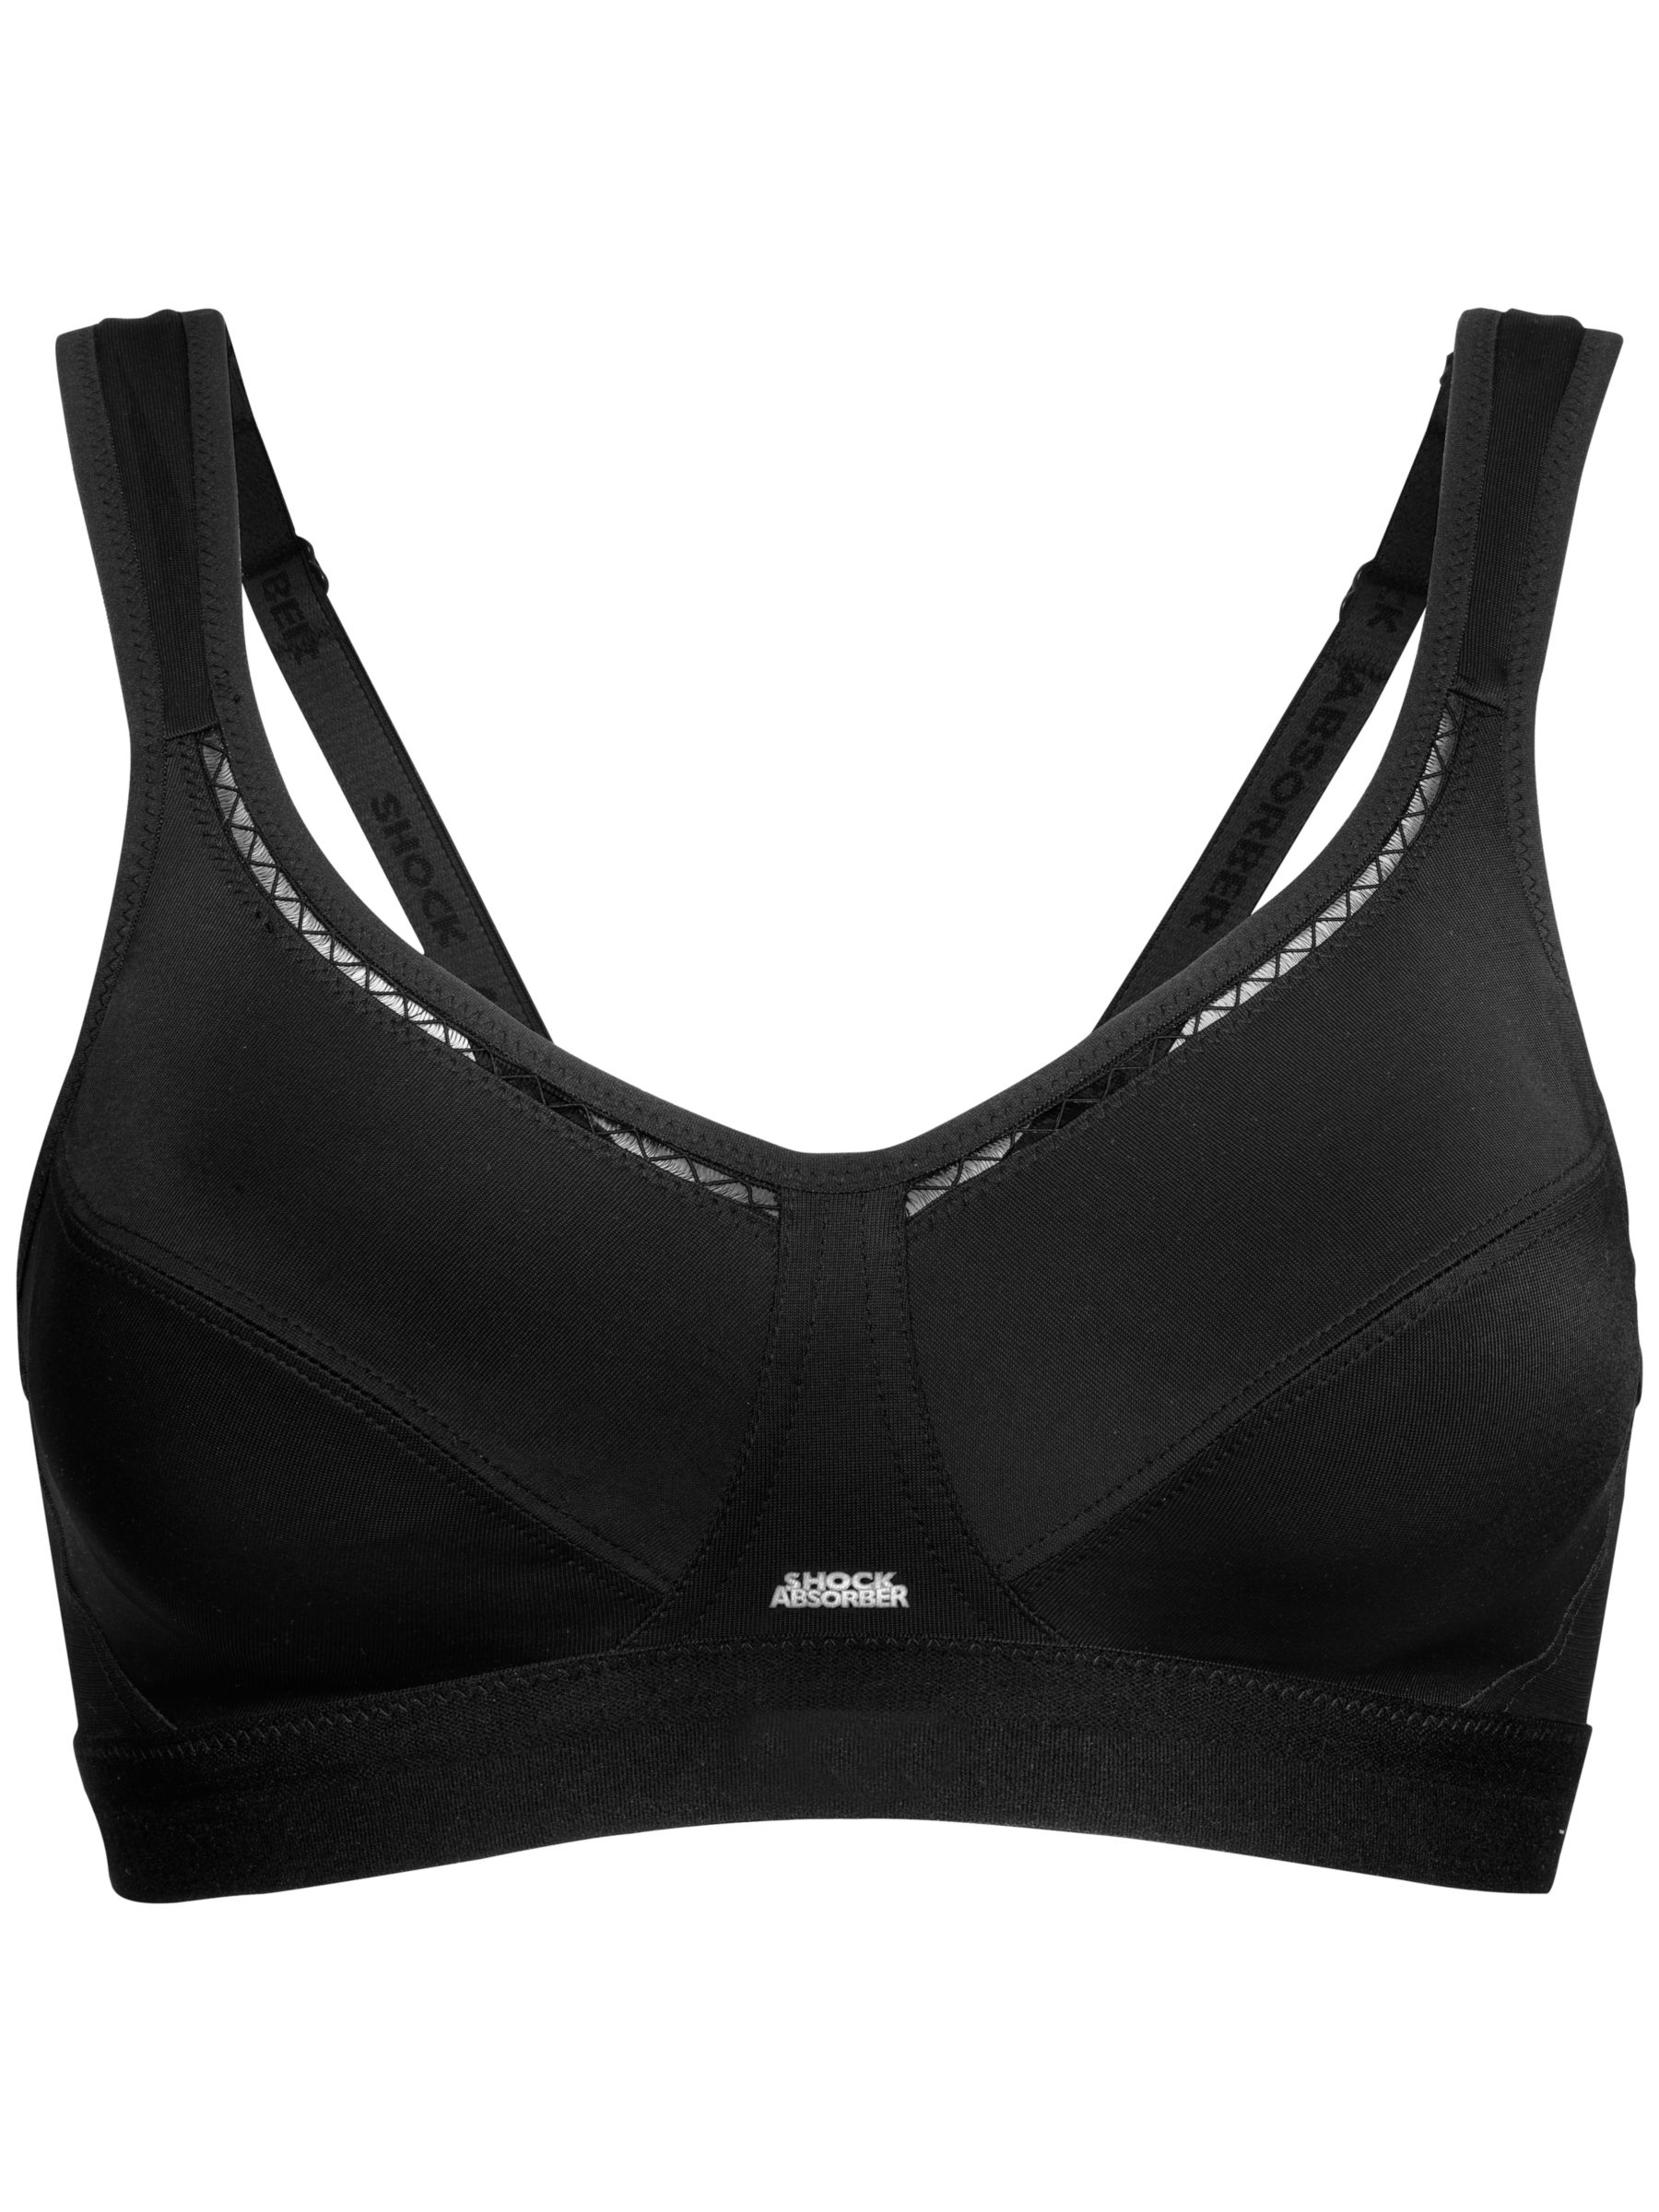 ROXY Athletic Sports Bra Size Women's Small. Black with Text Letters.  Strappy